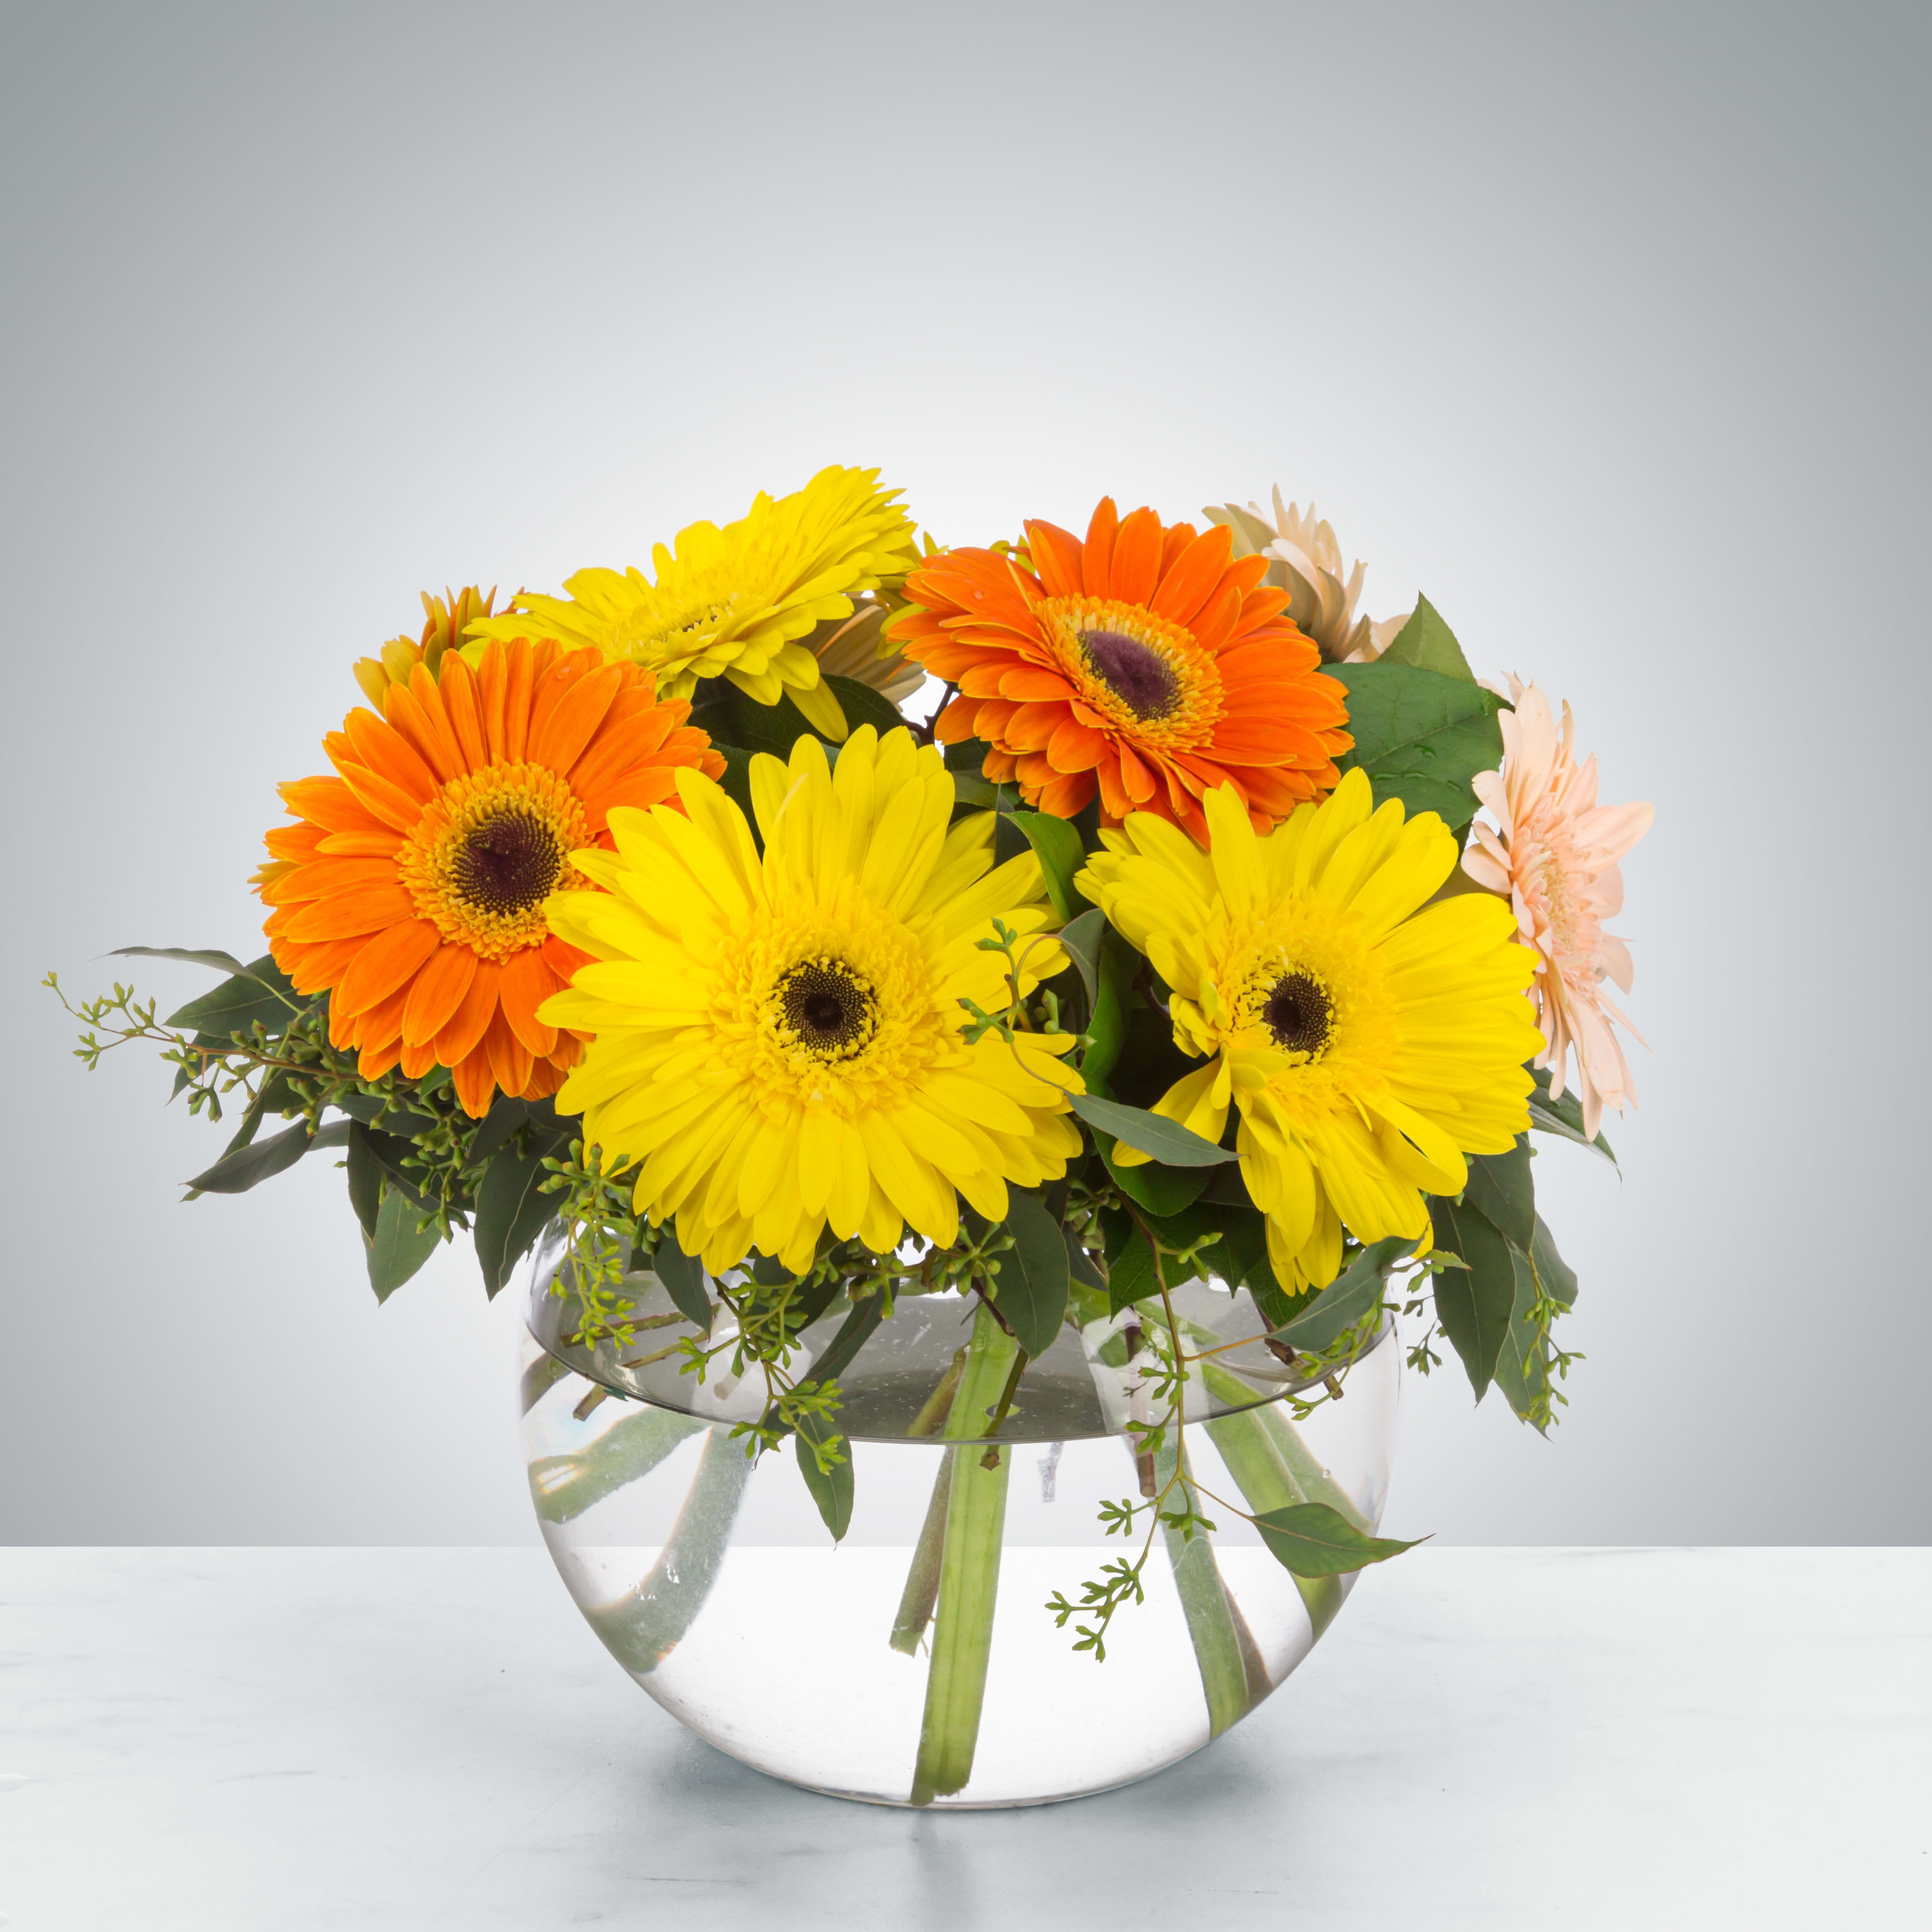 Dazzling Daisy Bowl  - An instant brightener, send somebody a bowl full of Gerbera Daisies. To quote Kathleen Kelly &quot;They're so friendly. Don't you think daisies are the friendliest flower?&quot;. Gerbera Daisies make a perfect just because gift or birthday wishes.  1st Image: Standard 2nd Image: Premium